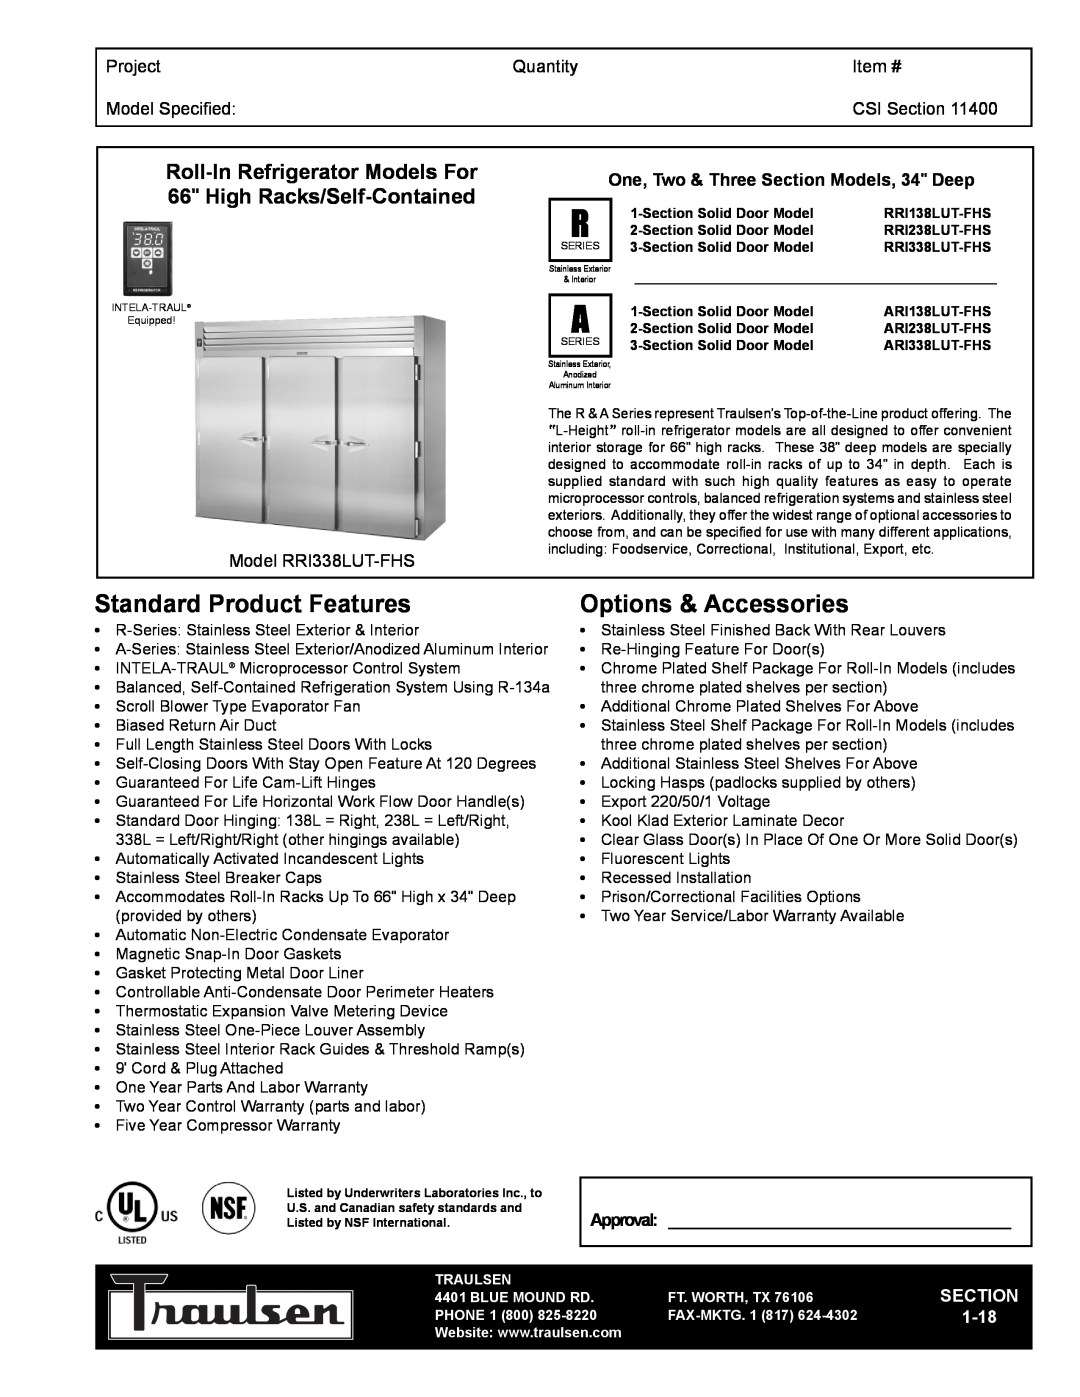 Traulsen TR35772 warranty Roll-InRefrigerator Models For, High Racks/Self-Contained, Project, Quantity, Item #, Section 